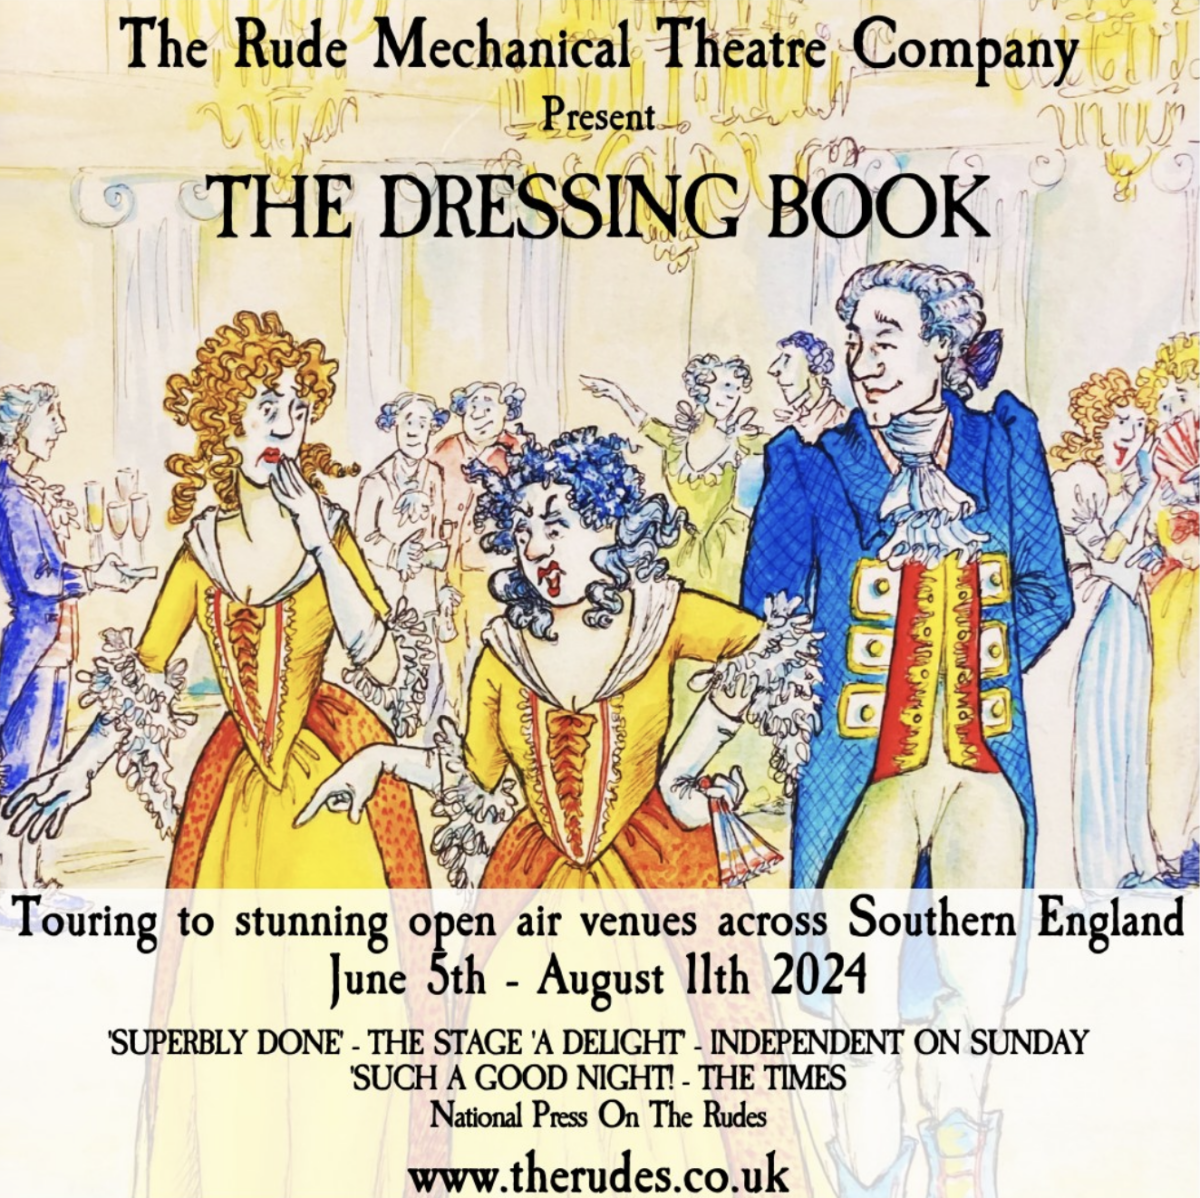 The Dressing Book flyer - The Rude Mechanical Theatre Company